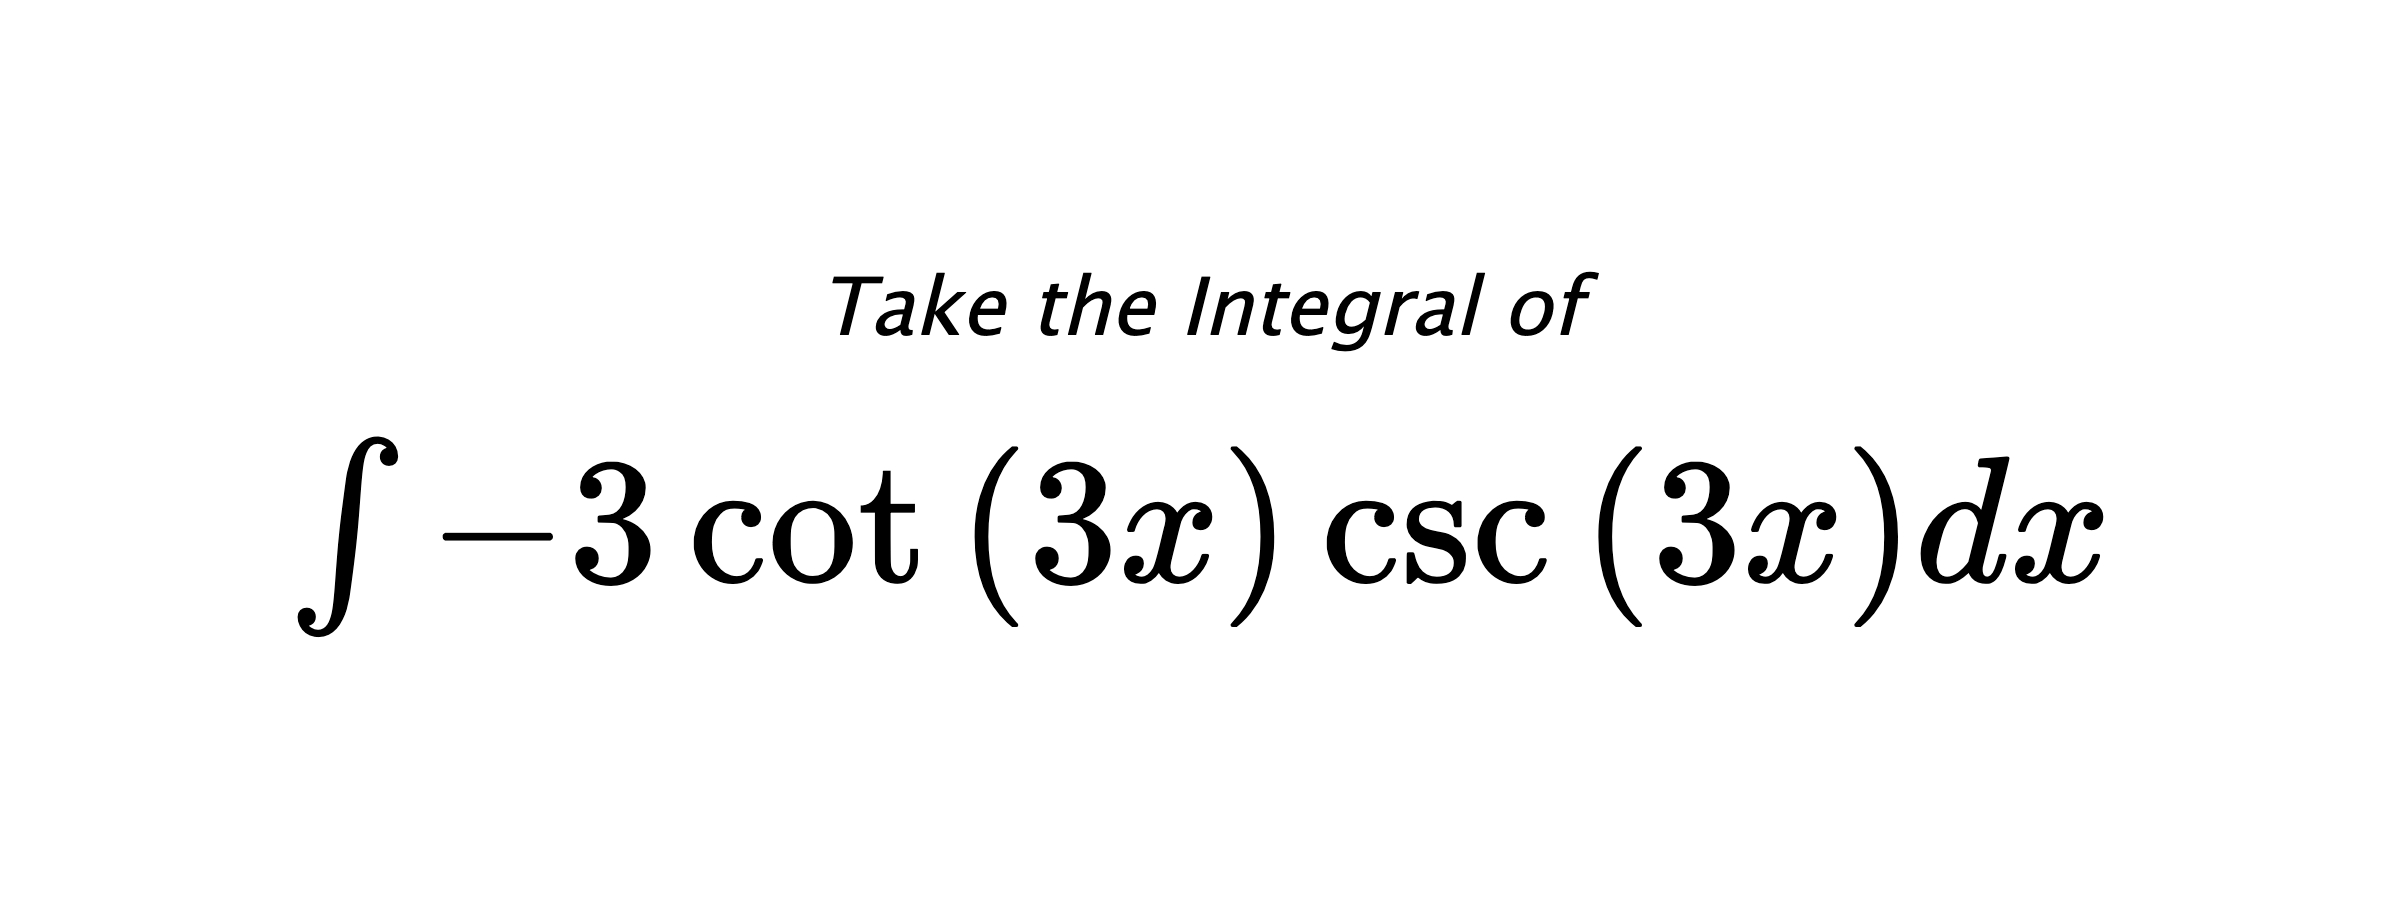 Take the Integral of $ \int - 3 \cot{\left(3 x \right)} \csc{\left(3 x \right)} dx $